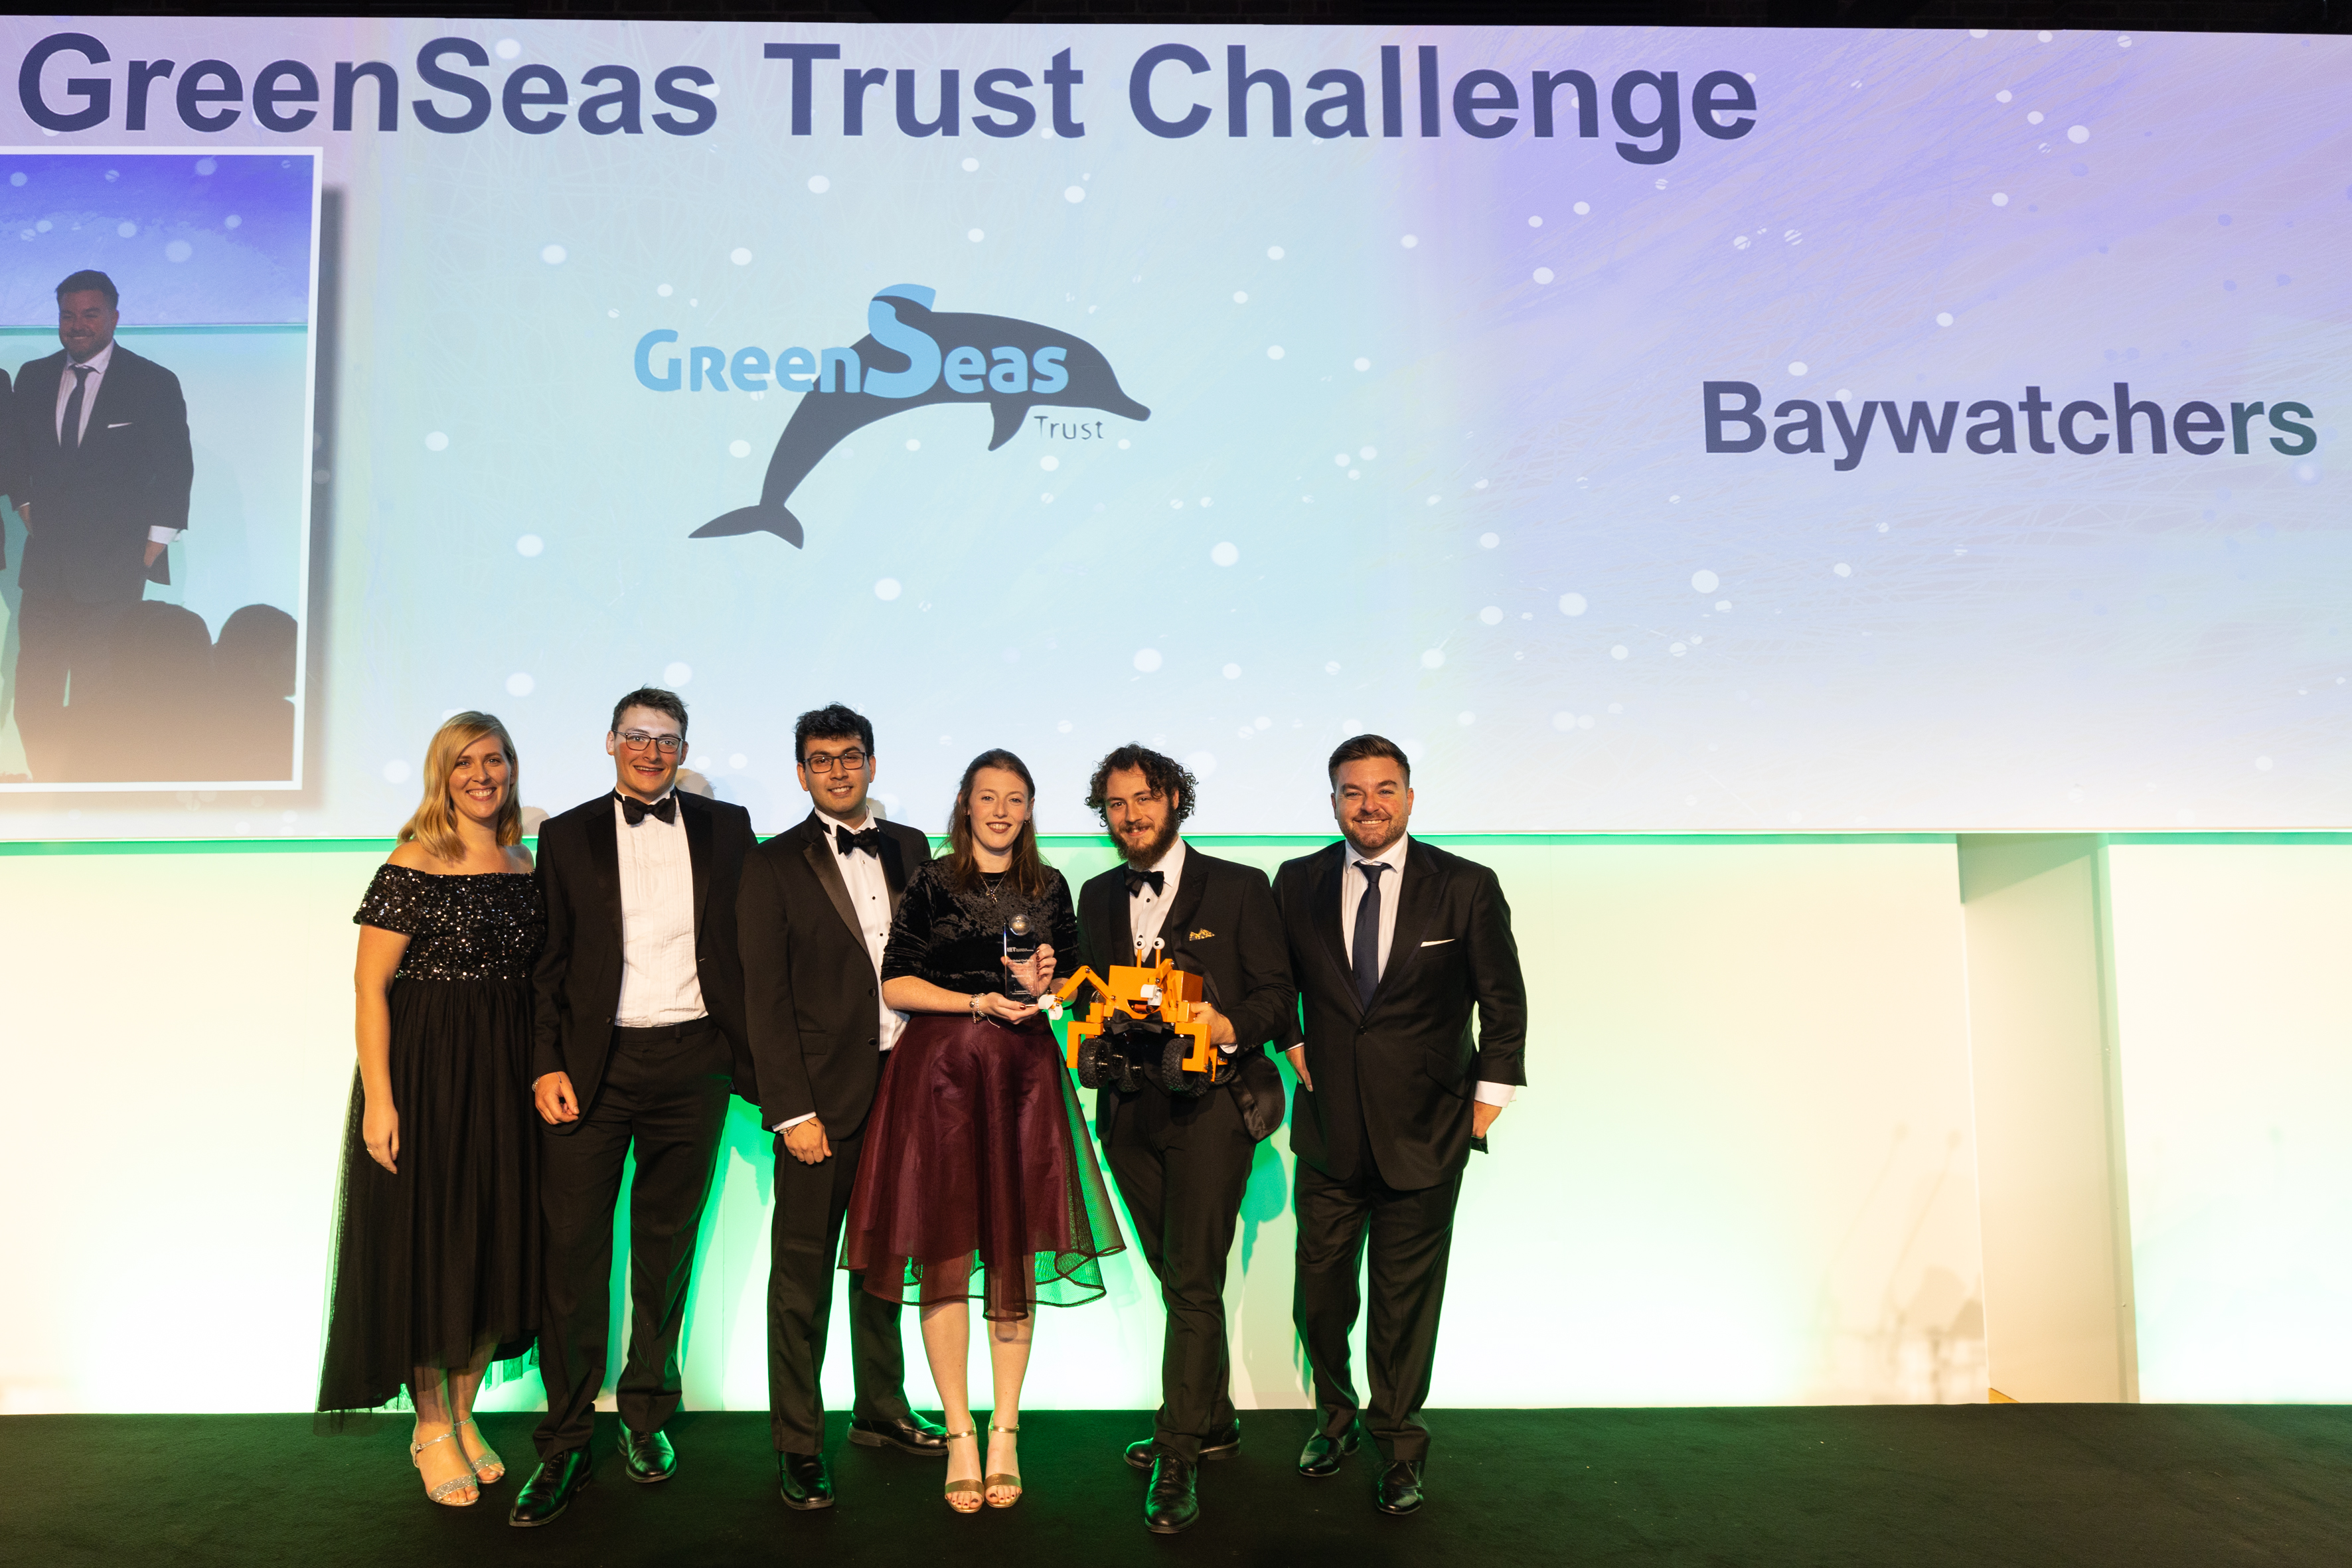 A photo of 6 people standing on a stage in formal dress, in front of a screen which reads GreenSeas Trust Challenge: Baywatchers.